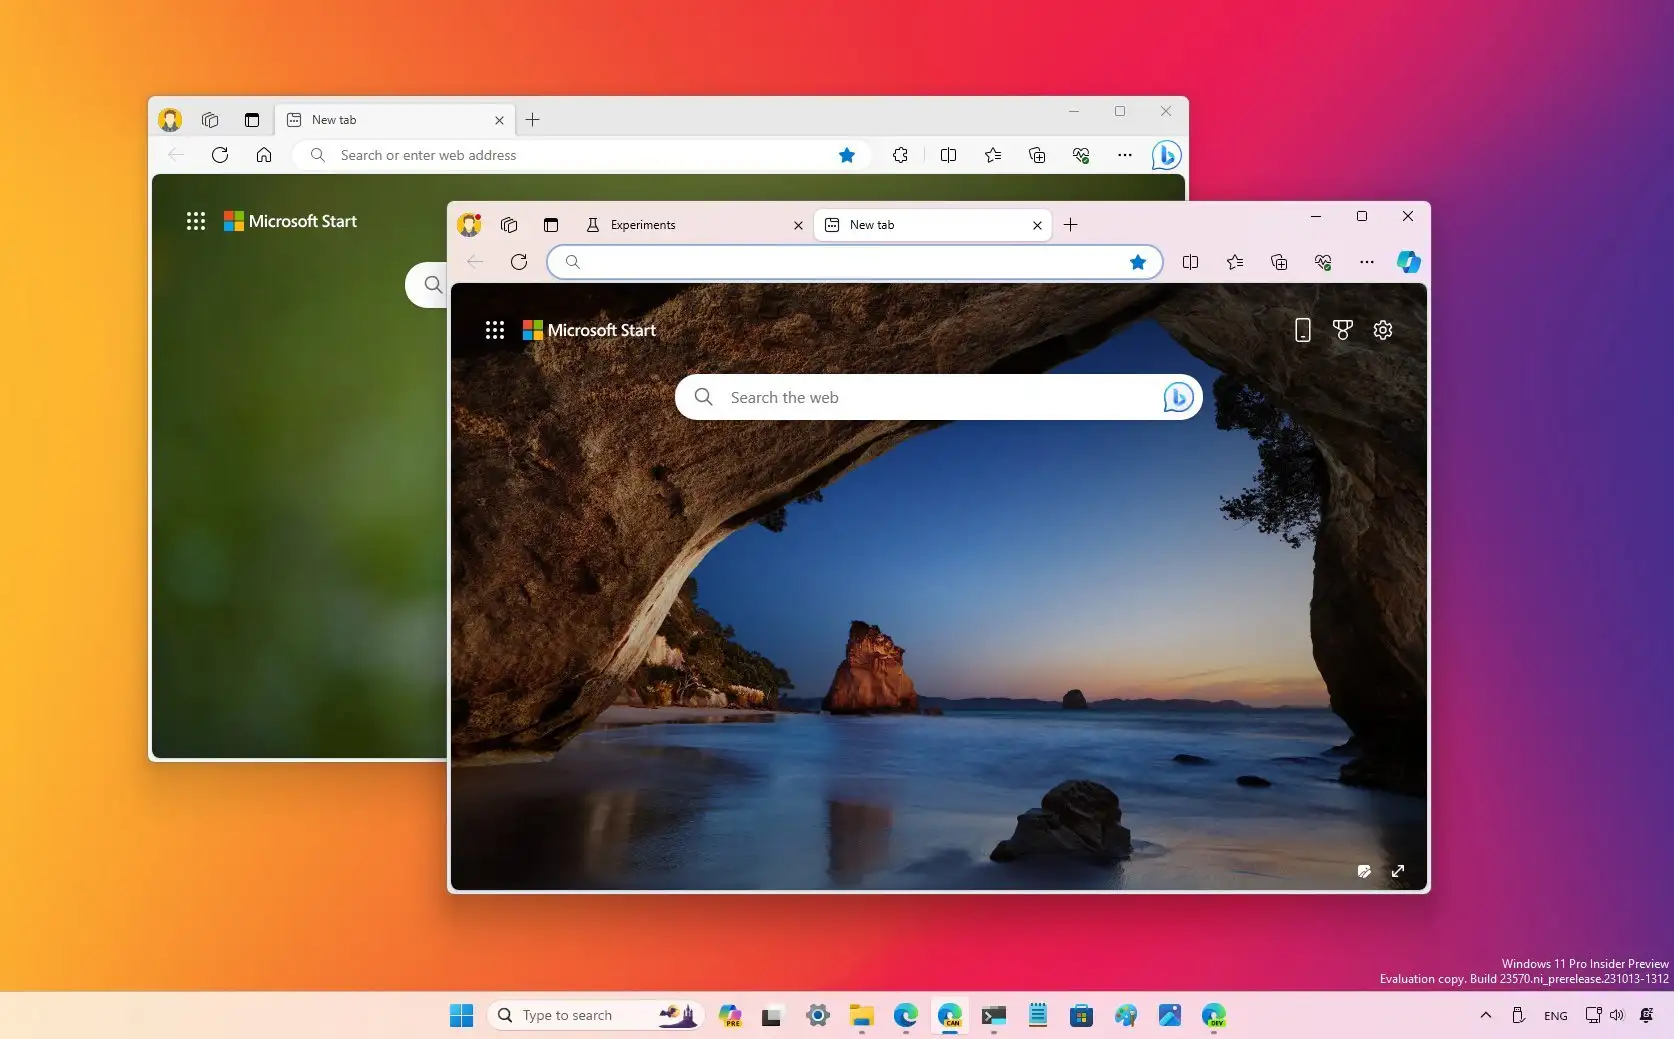 How to enable new mica material on Microsoft Edge